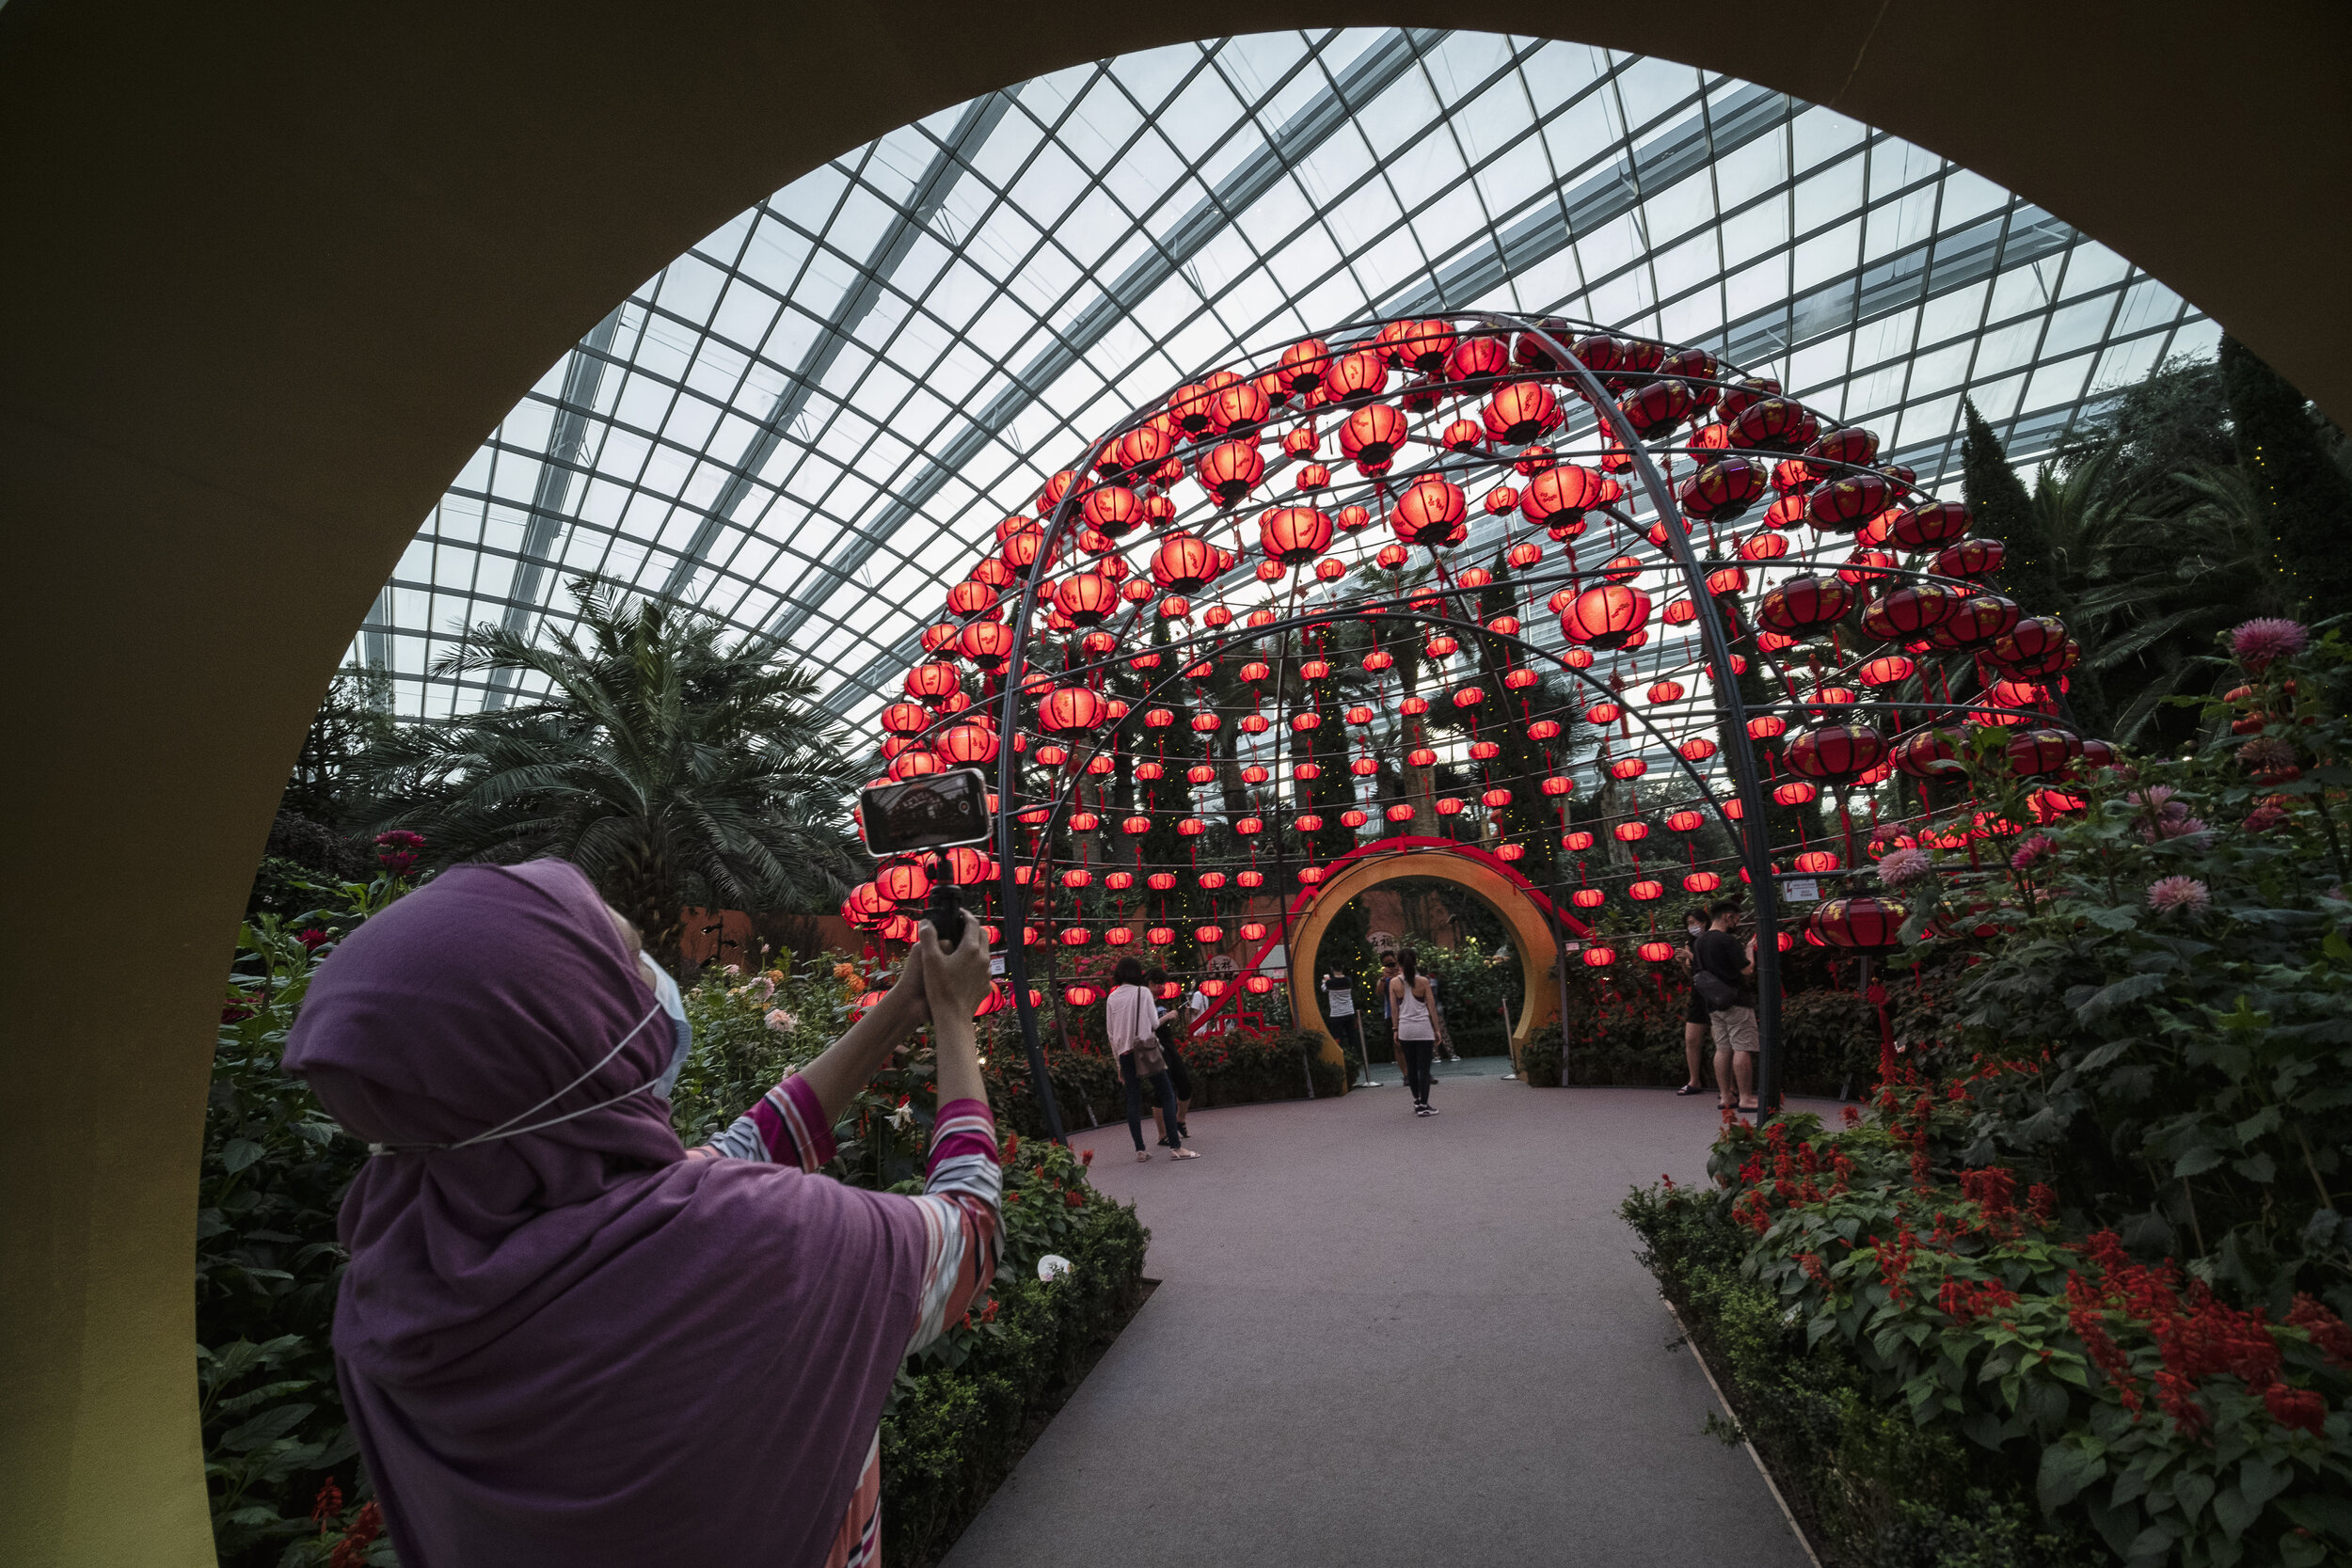  A woman uses a smartphone to document her visit to the annual Dahlia Dreams floral display ahead of the Chinese Lunar New Year of the Ox, otherwise known as the Spring Festival, at Singapore's Gardens by the Bay, January 31, 2021. REUTERS/Loriene Pe